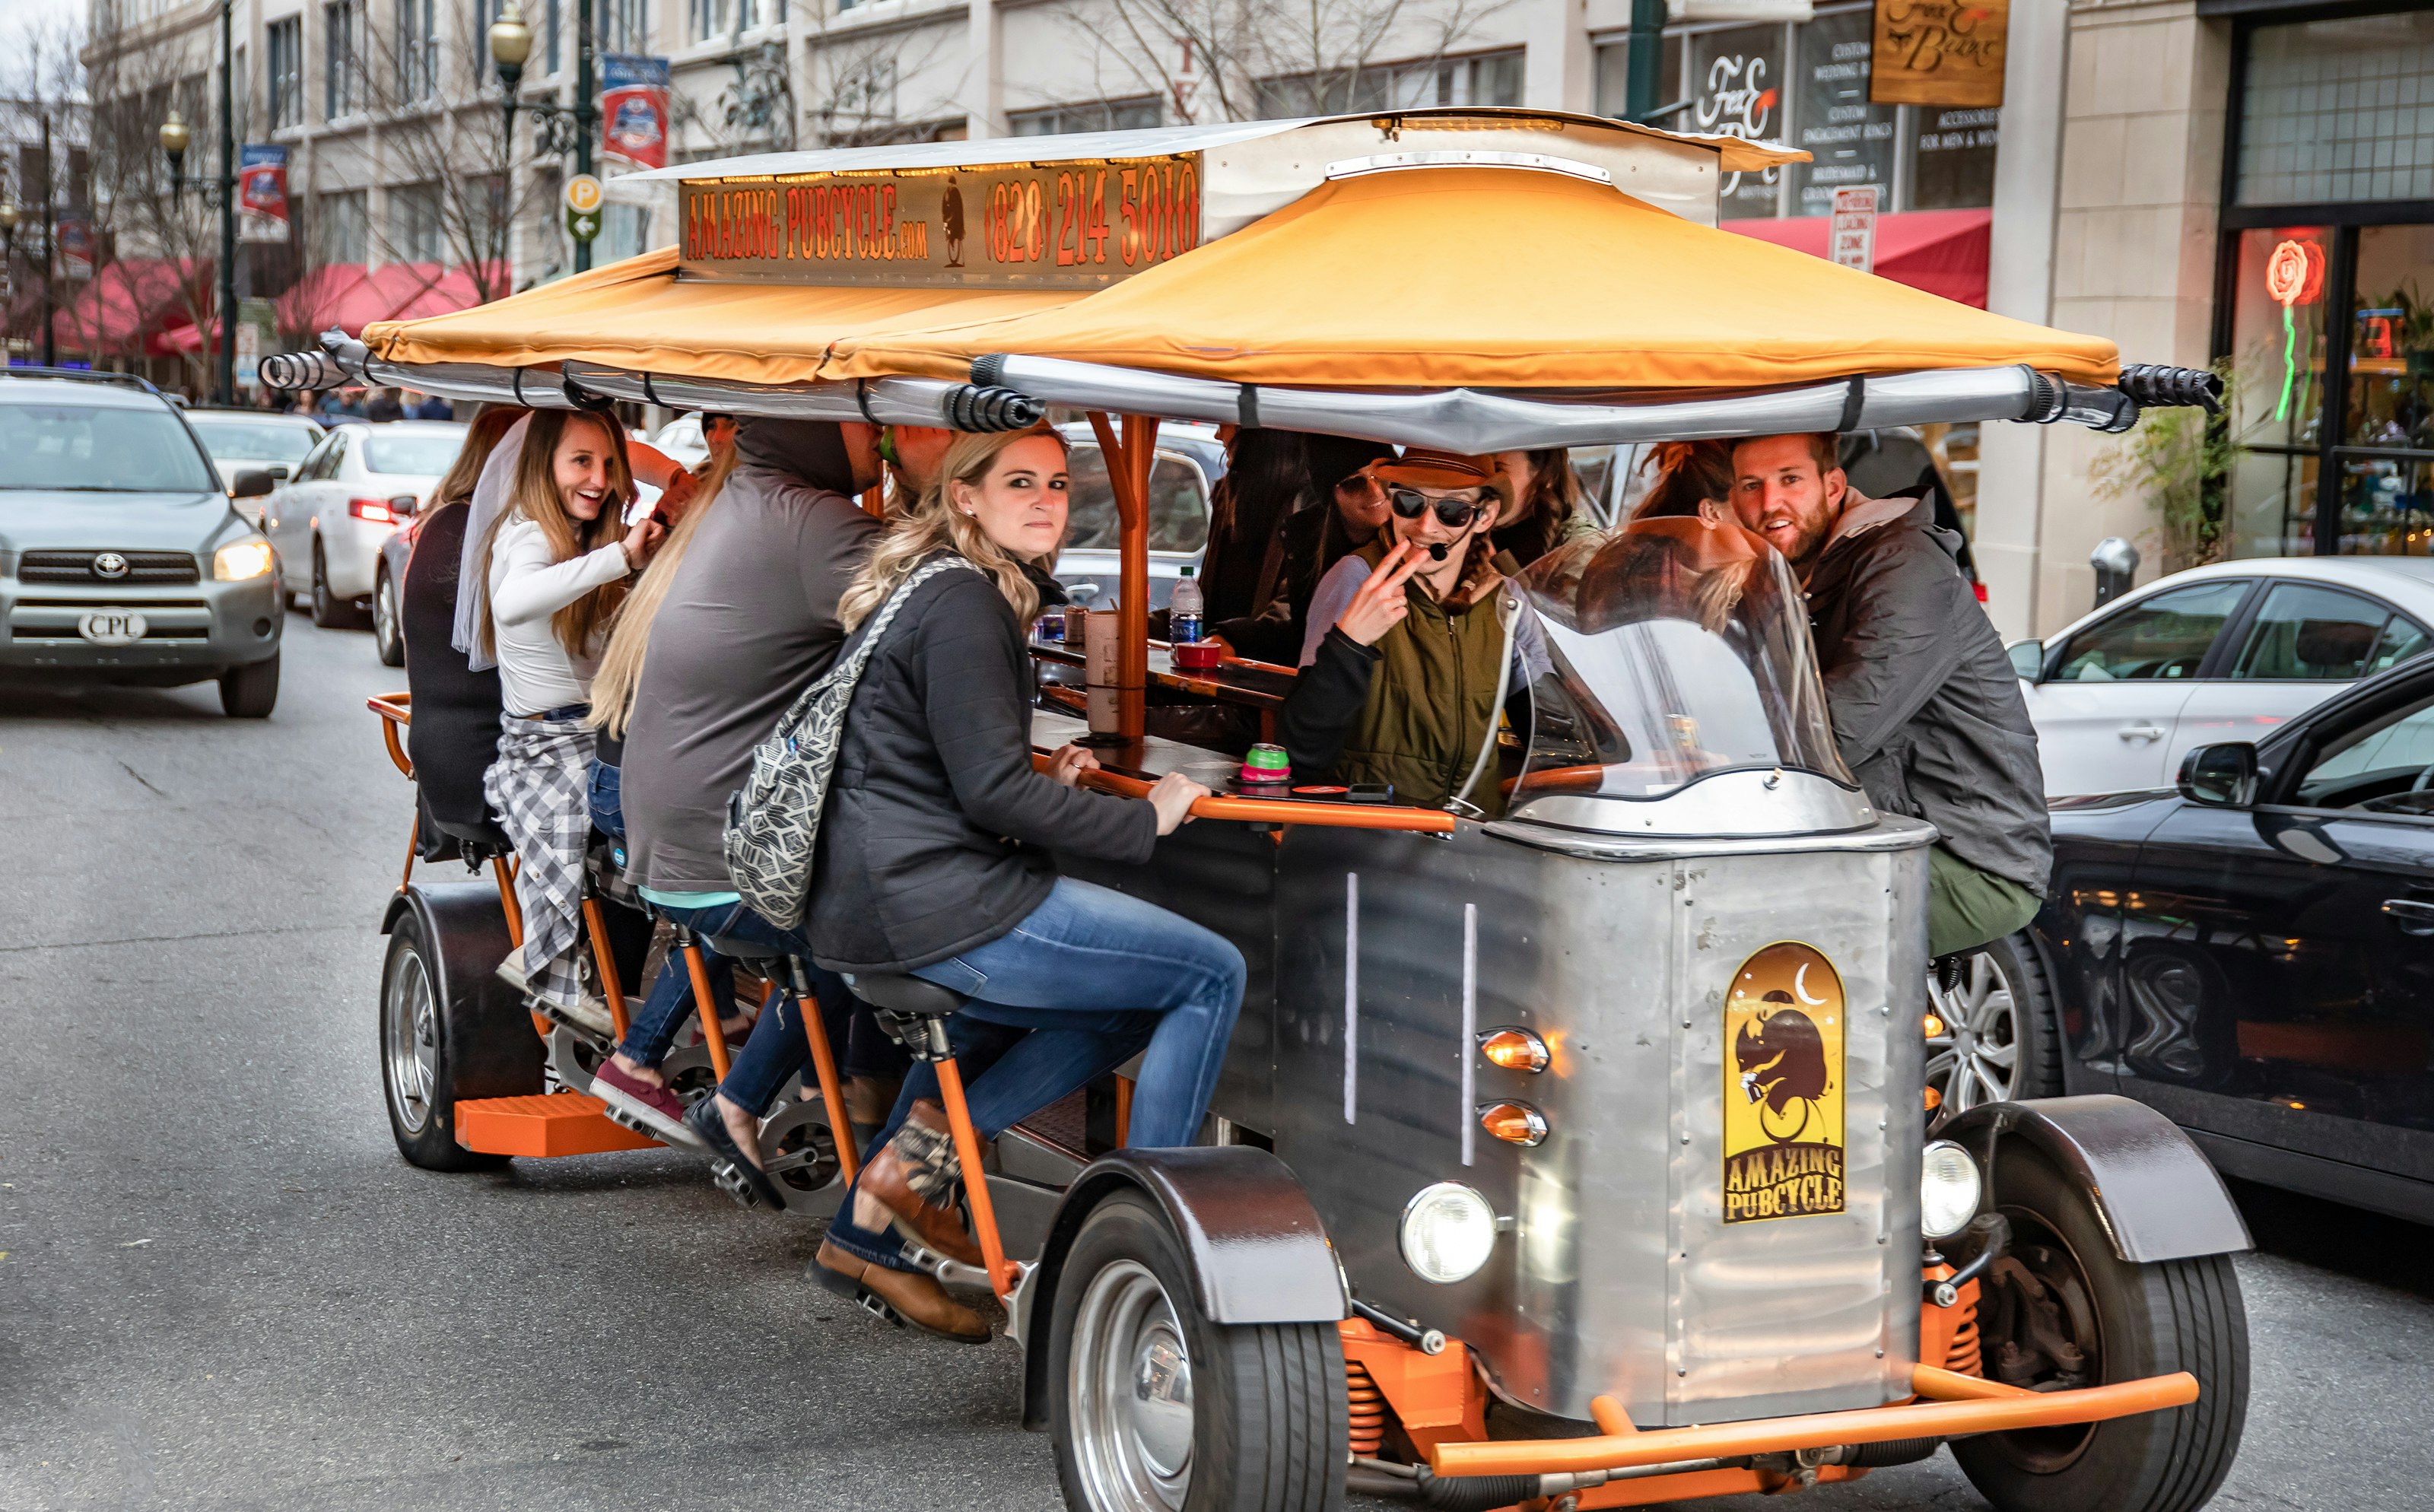 A group of people move through downtown Asheville in a pedal tavern; bachelorette party